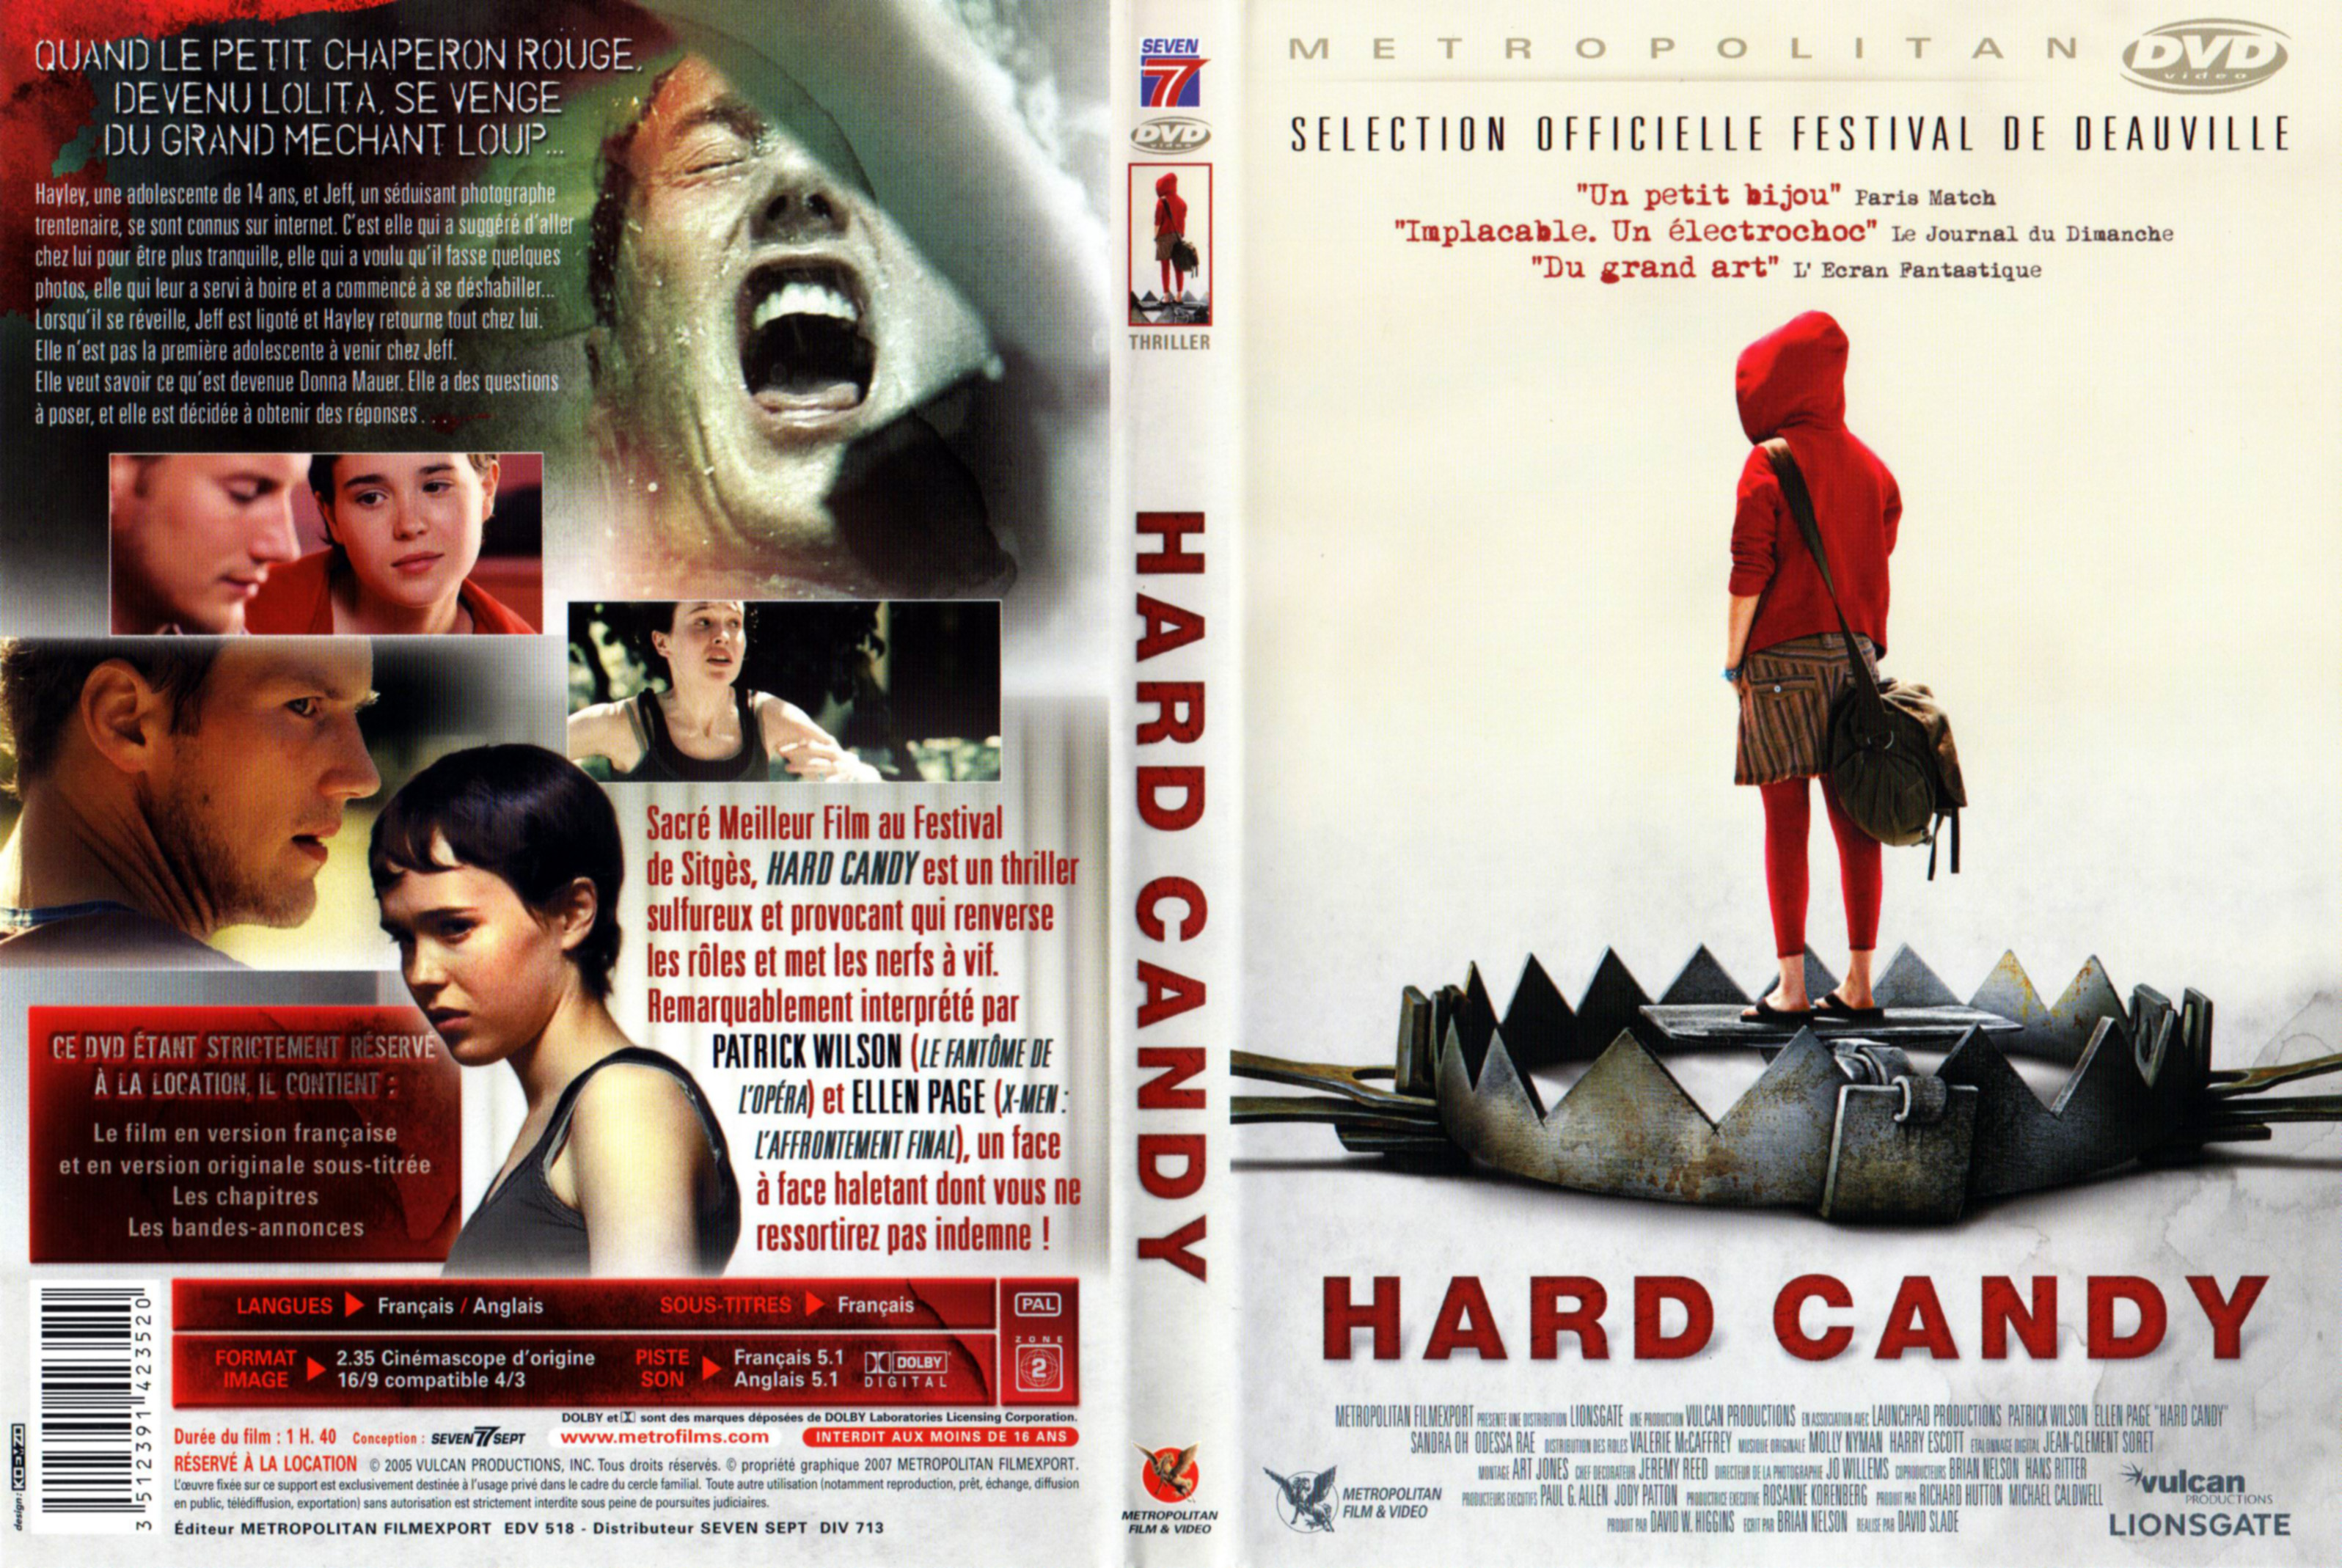 Jaquette DVD Hard candy